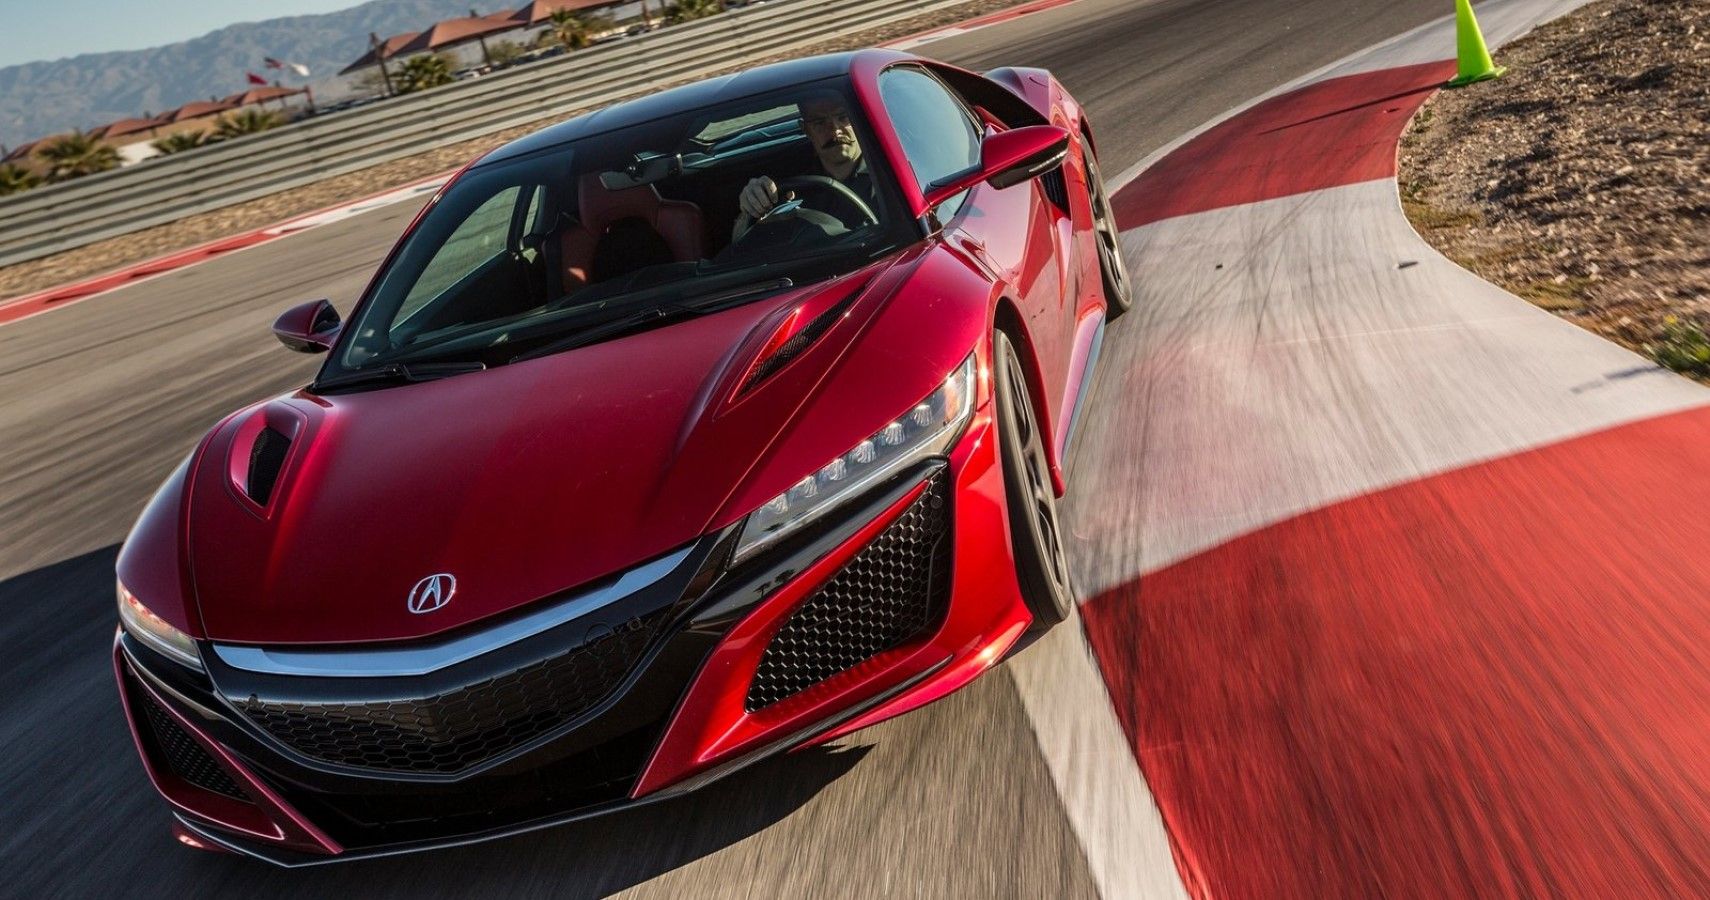 2017 Acura NSX cinematic front view on racetrack